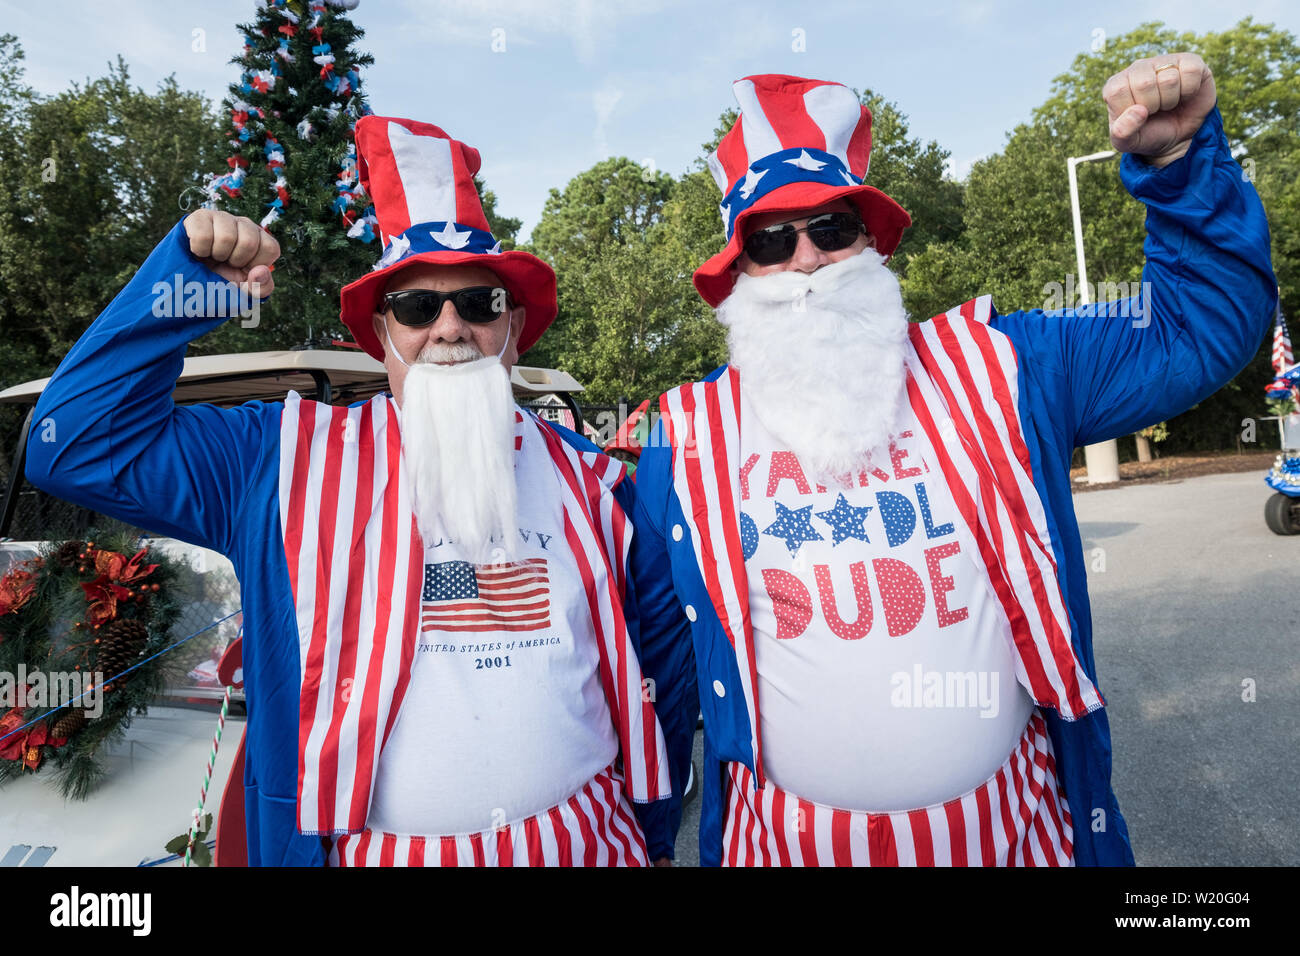 Men dressed in Uncle Sam costumes at the annual Independence Day golf cart and bicycle parade July 4, 2019 in Sullivan's Island, South Carolina. The tiny affluent Sea Island beach community across from Charleston holds an outsized golf cart parade featuring more than 75 decorated carts. Stock Photo